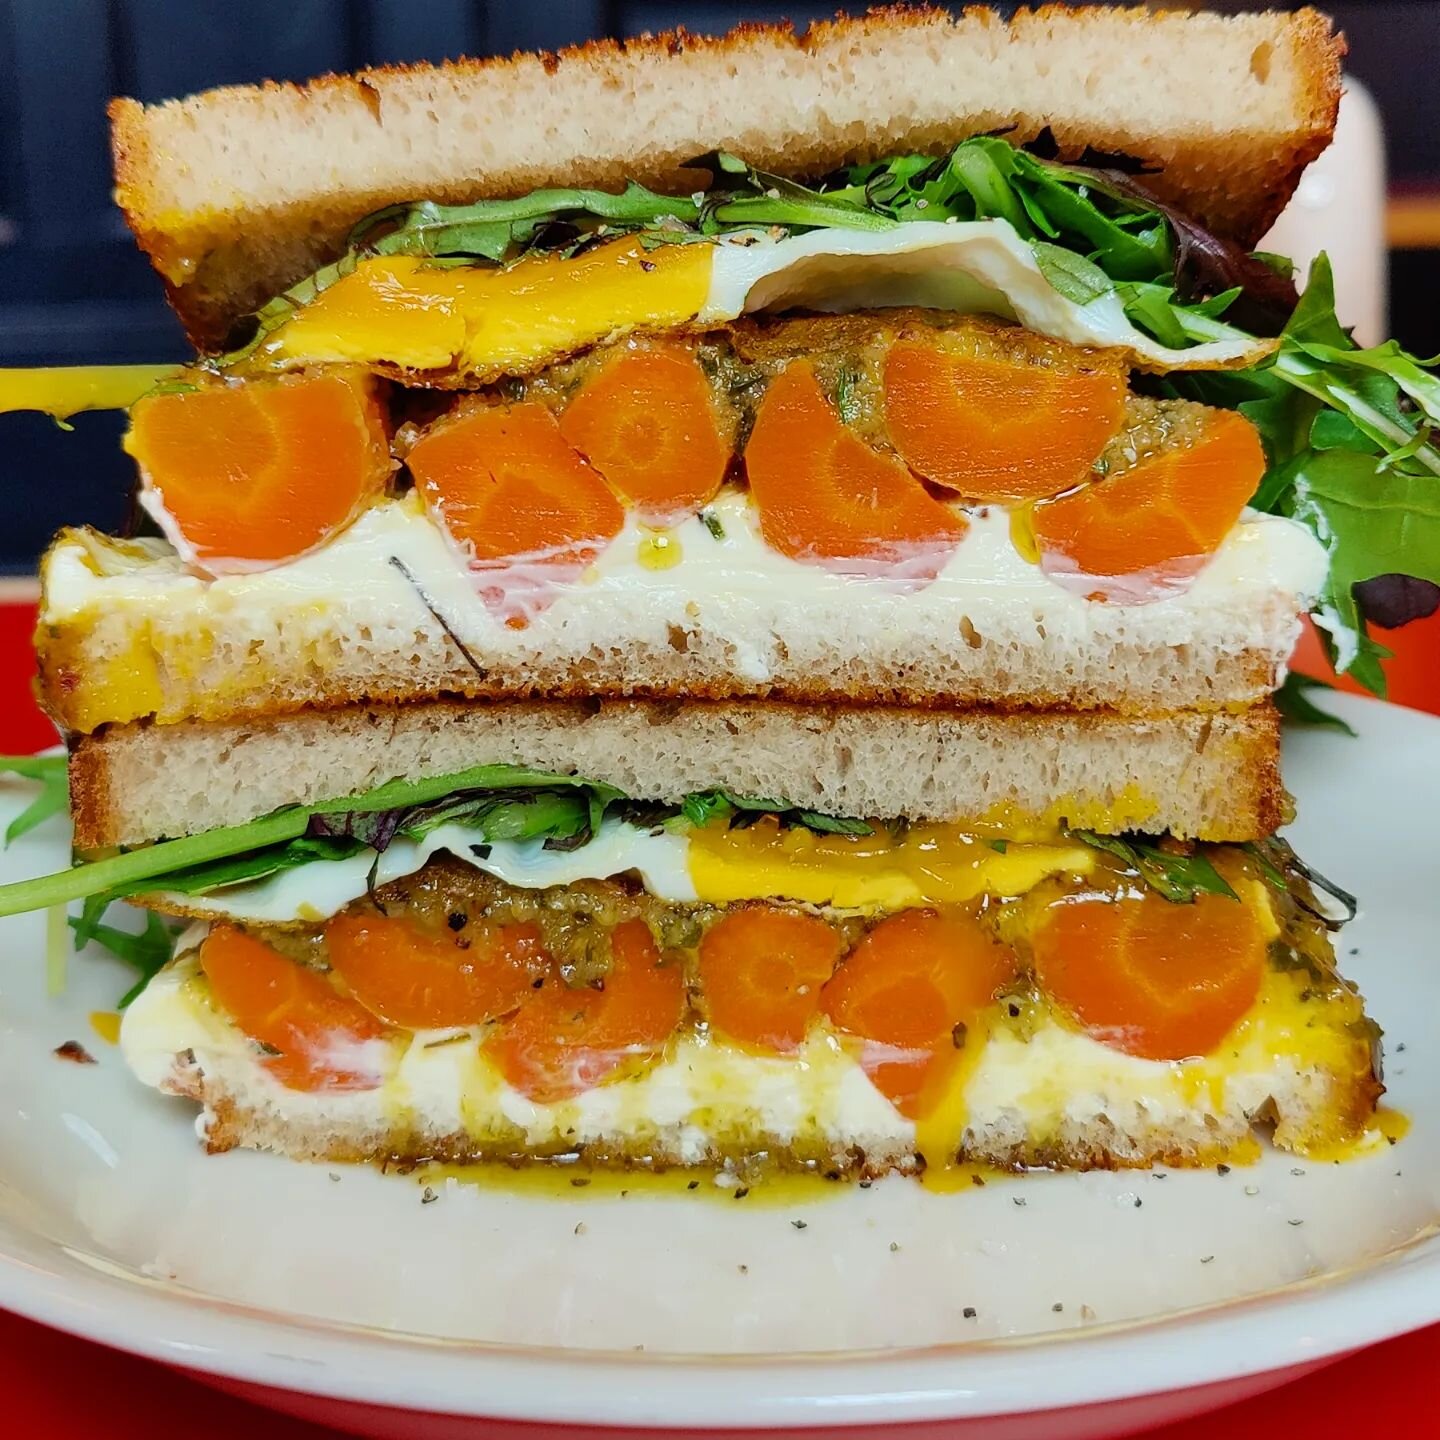 WHAT'S UP DOC? 🥕🐰 Our special sandwich this week is flavour sensation with the carrotiest carrots, superb sauce and zingy philly ✨ Jenny's Organic Carrots, Zesty Cream Cheese, Salsa Dragoncello, Rod's Organic Sunny Egg + McNally's Leaves ✨ @mcnally